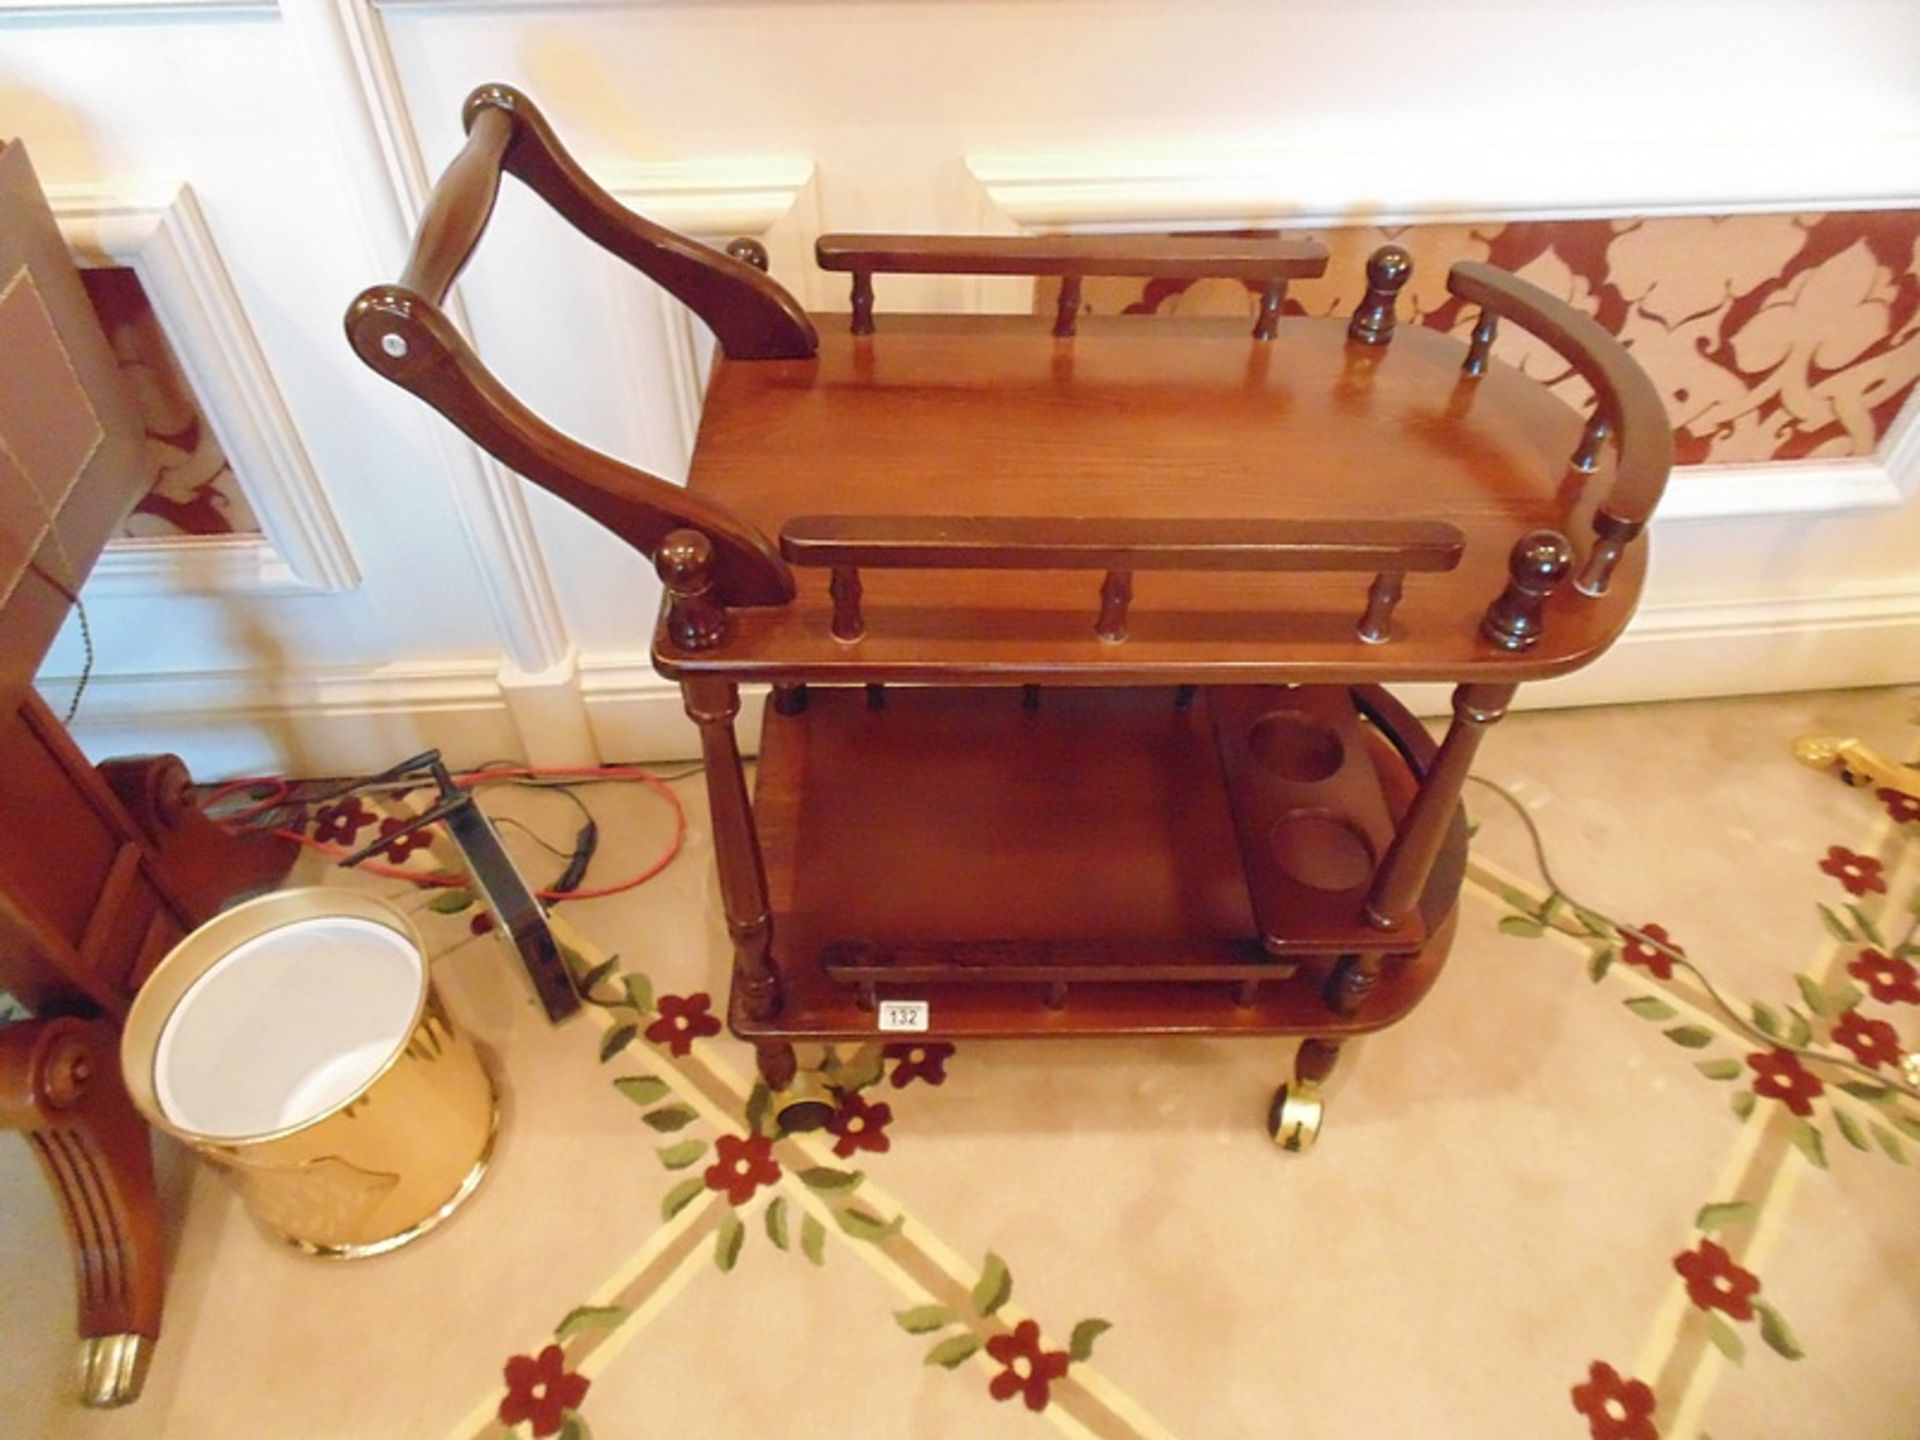 Mahogany mobile tea trolley two tier trolley on castored turned legs and railings 780mm x 360mm x